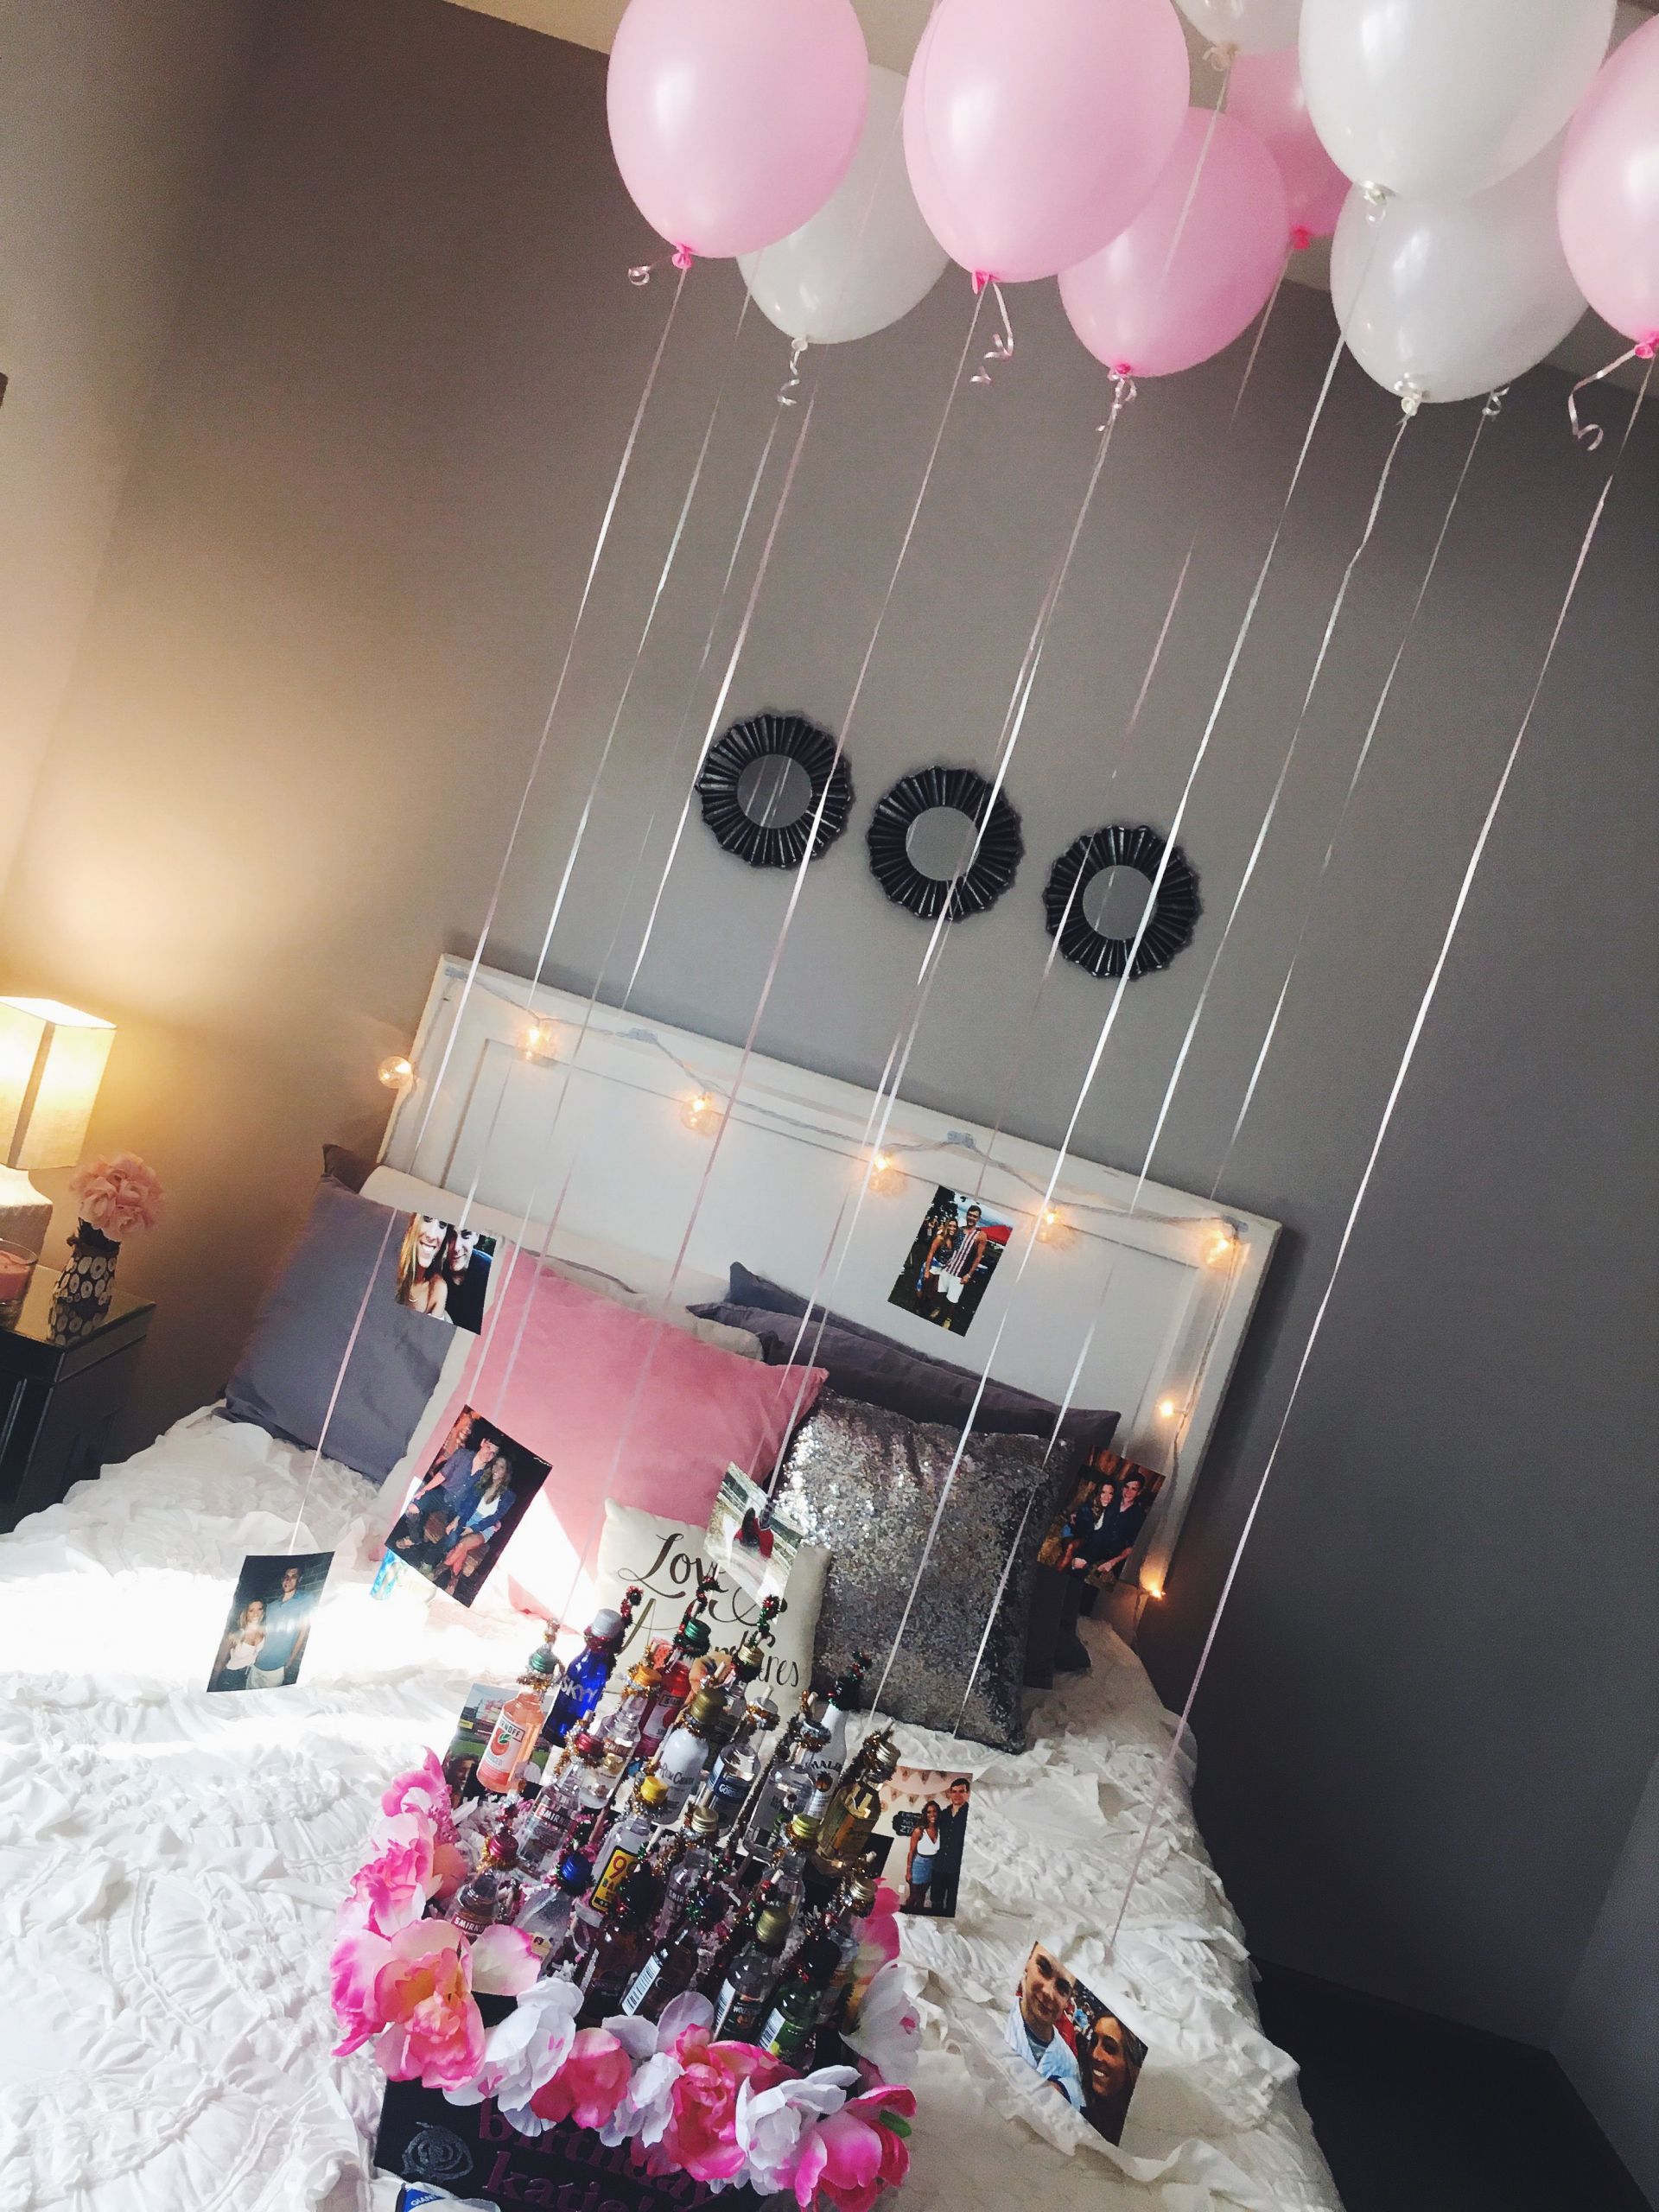 Good Birthday Gift Ideas For Girlfriend
 easy and cute decorations for a friend or girlfriends 21st